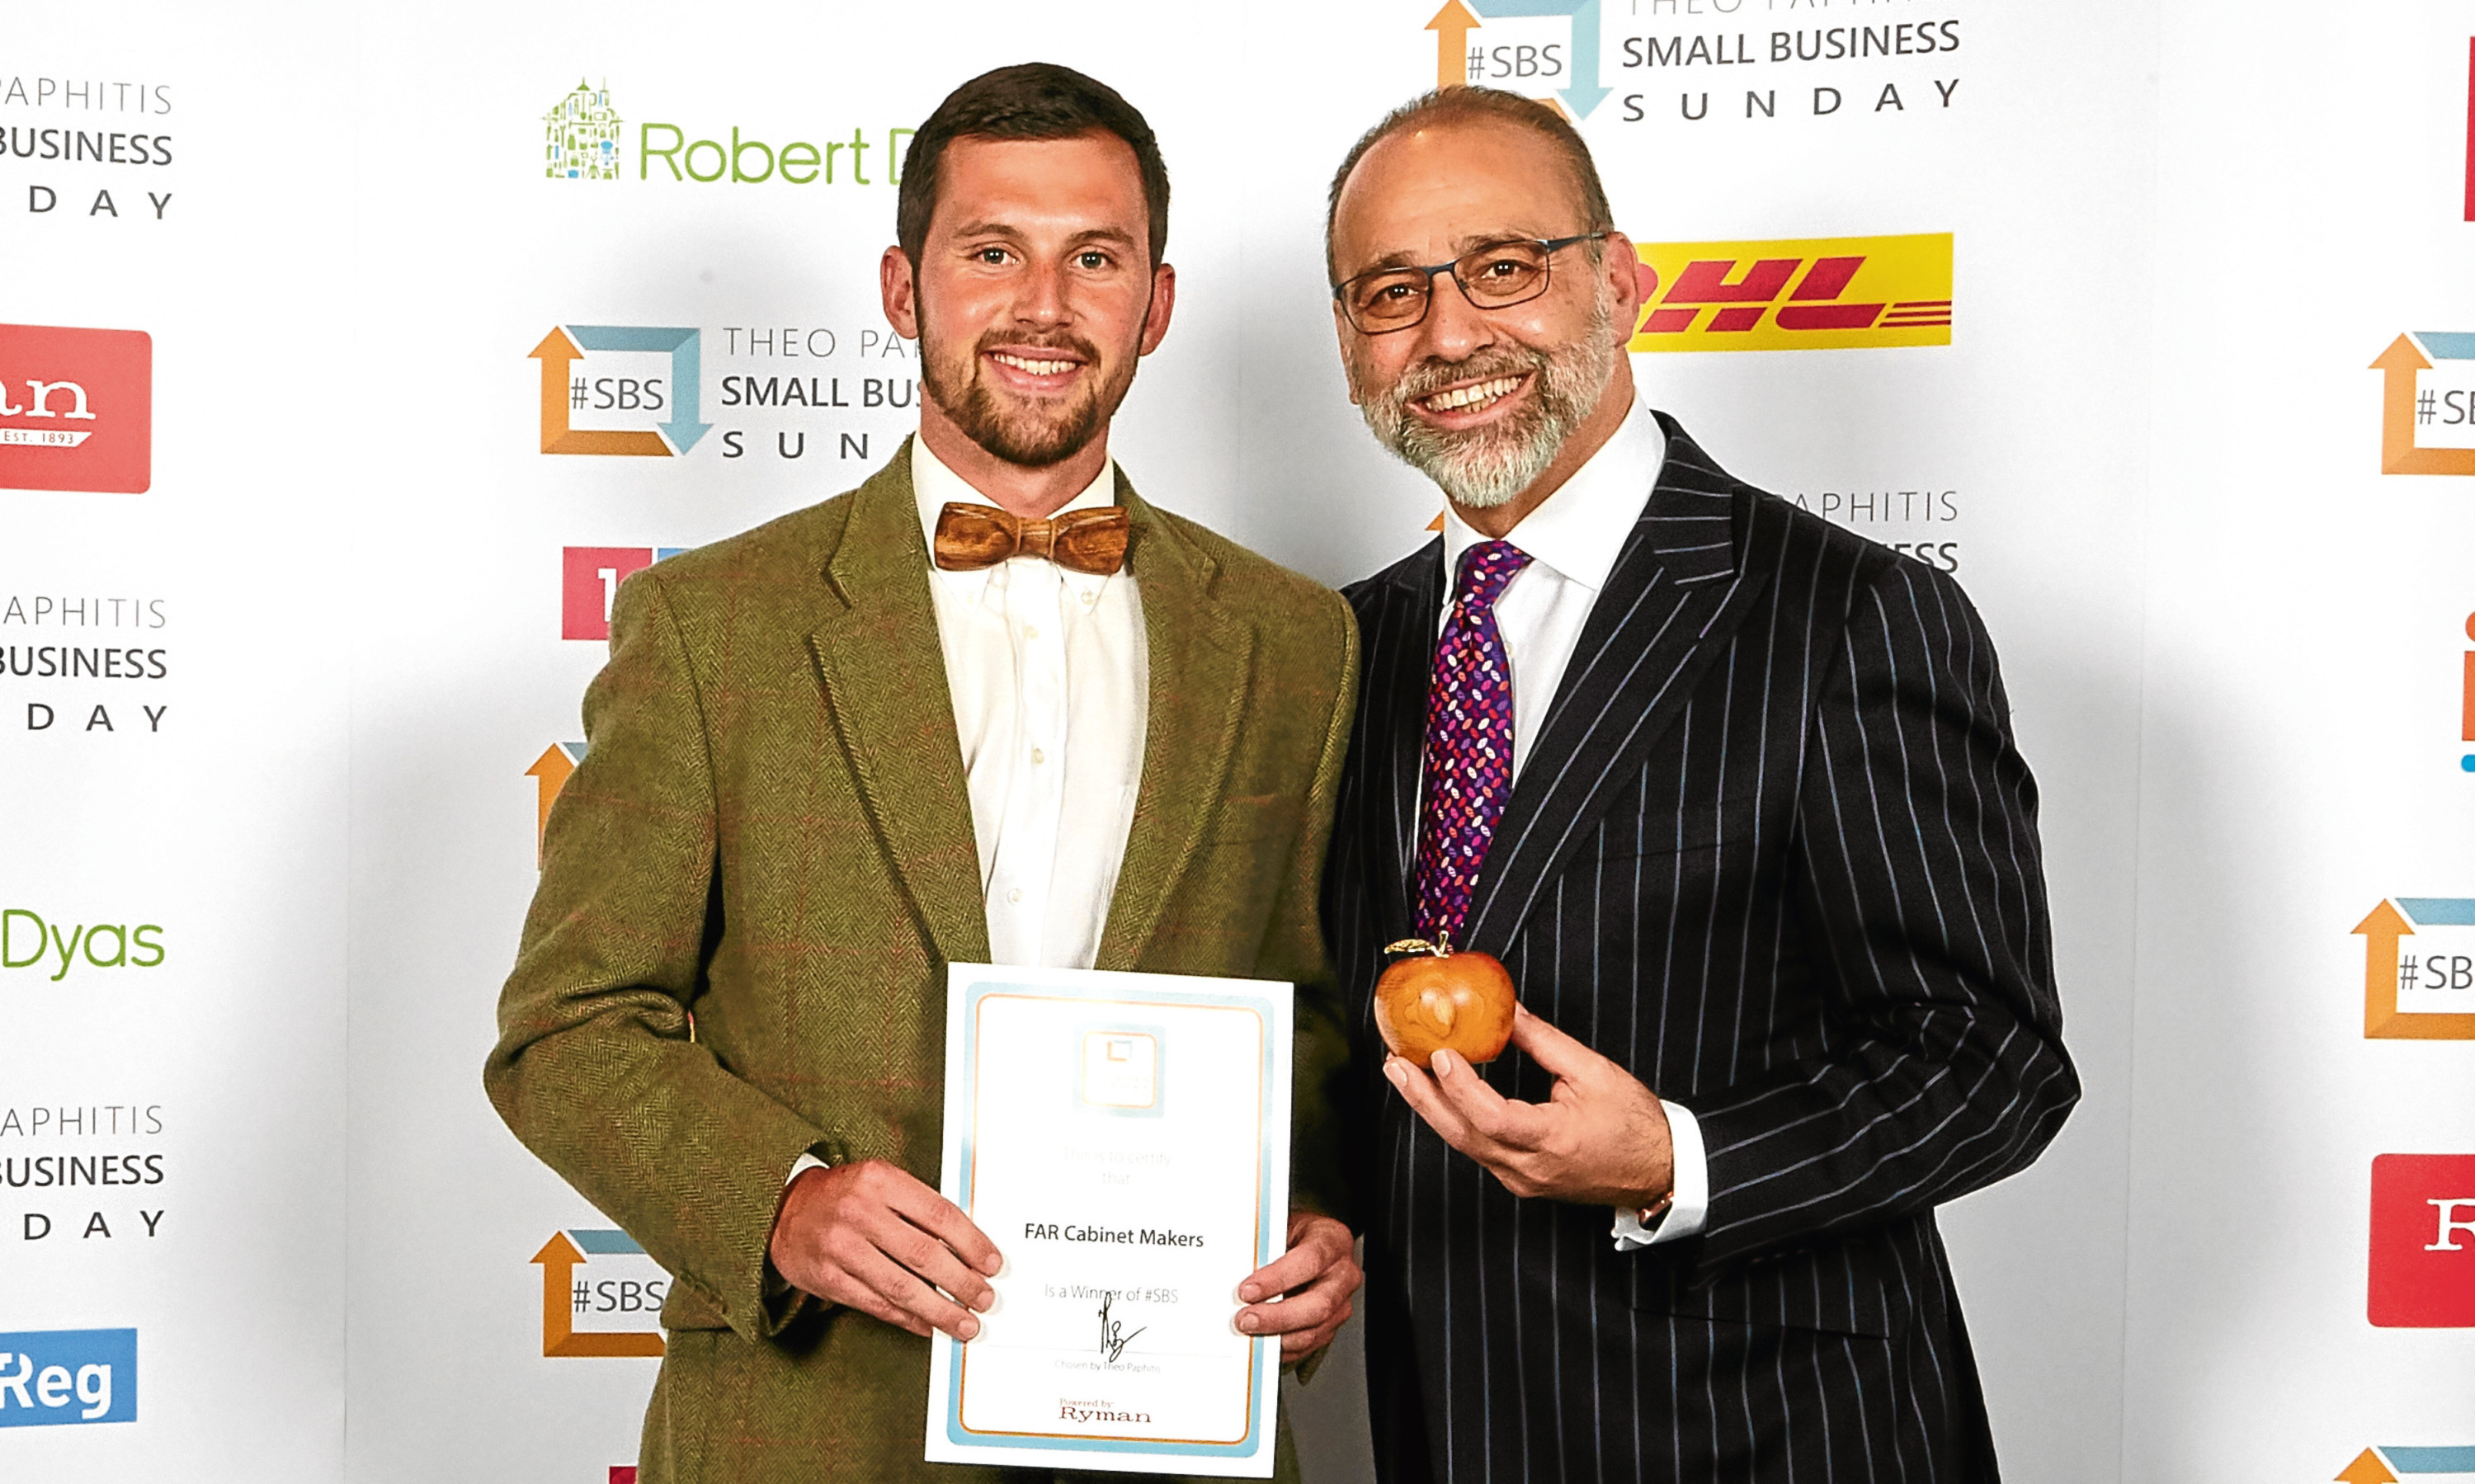 Frazer Reid of FAR Cabinet Makers of Fife with Theo Paphitis